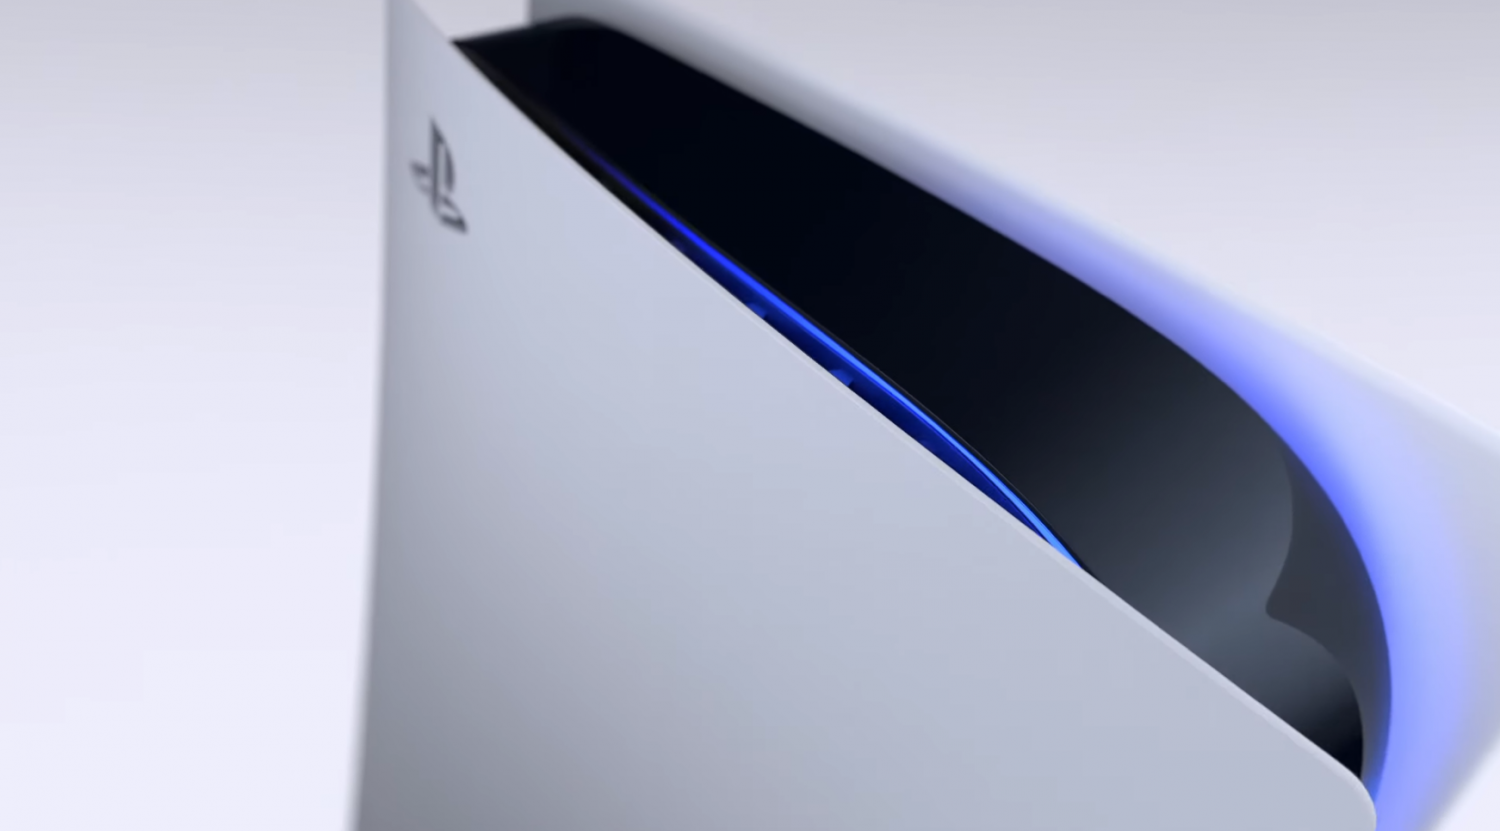 PS5 Pro specs corrected: Viola SoC to have RDNA 3 GPU with 60 CUs